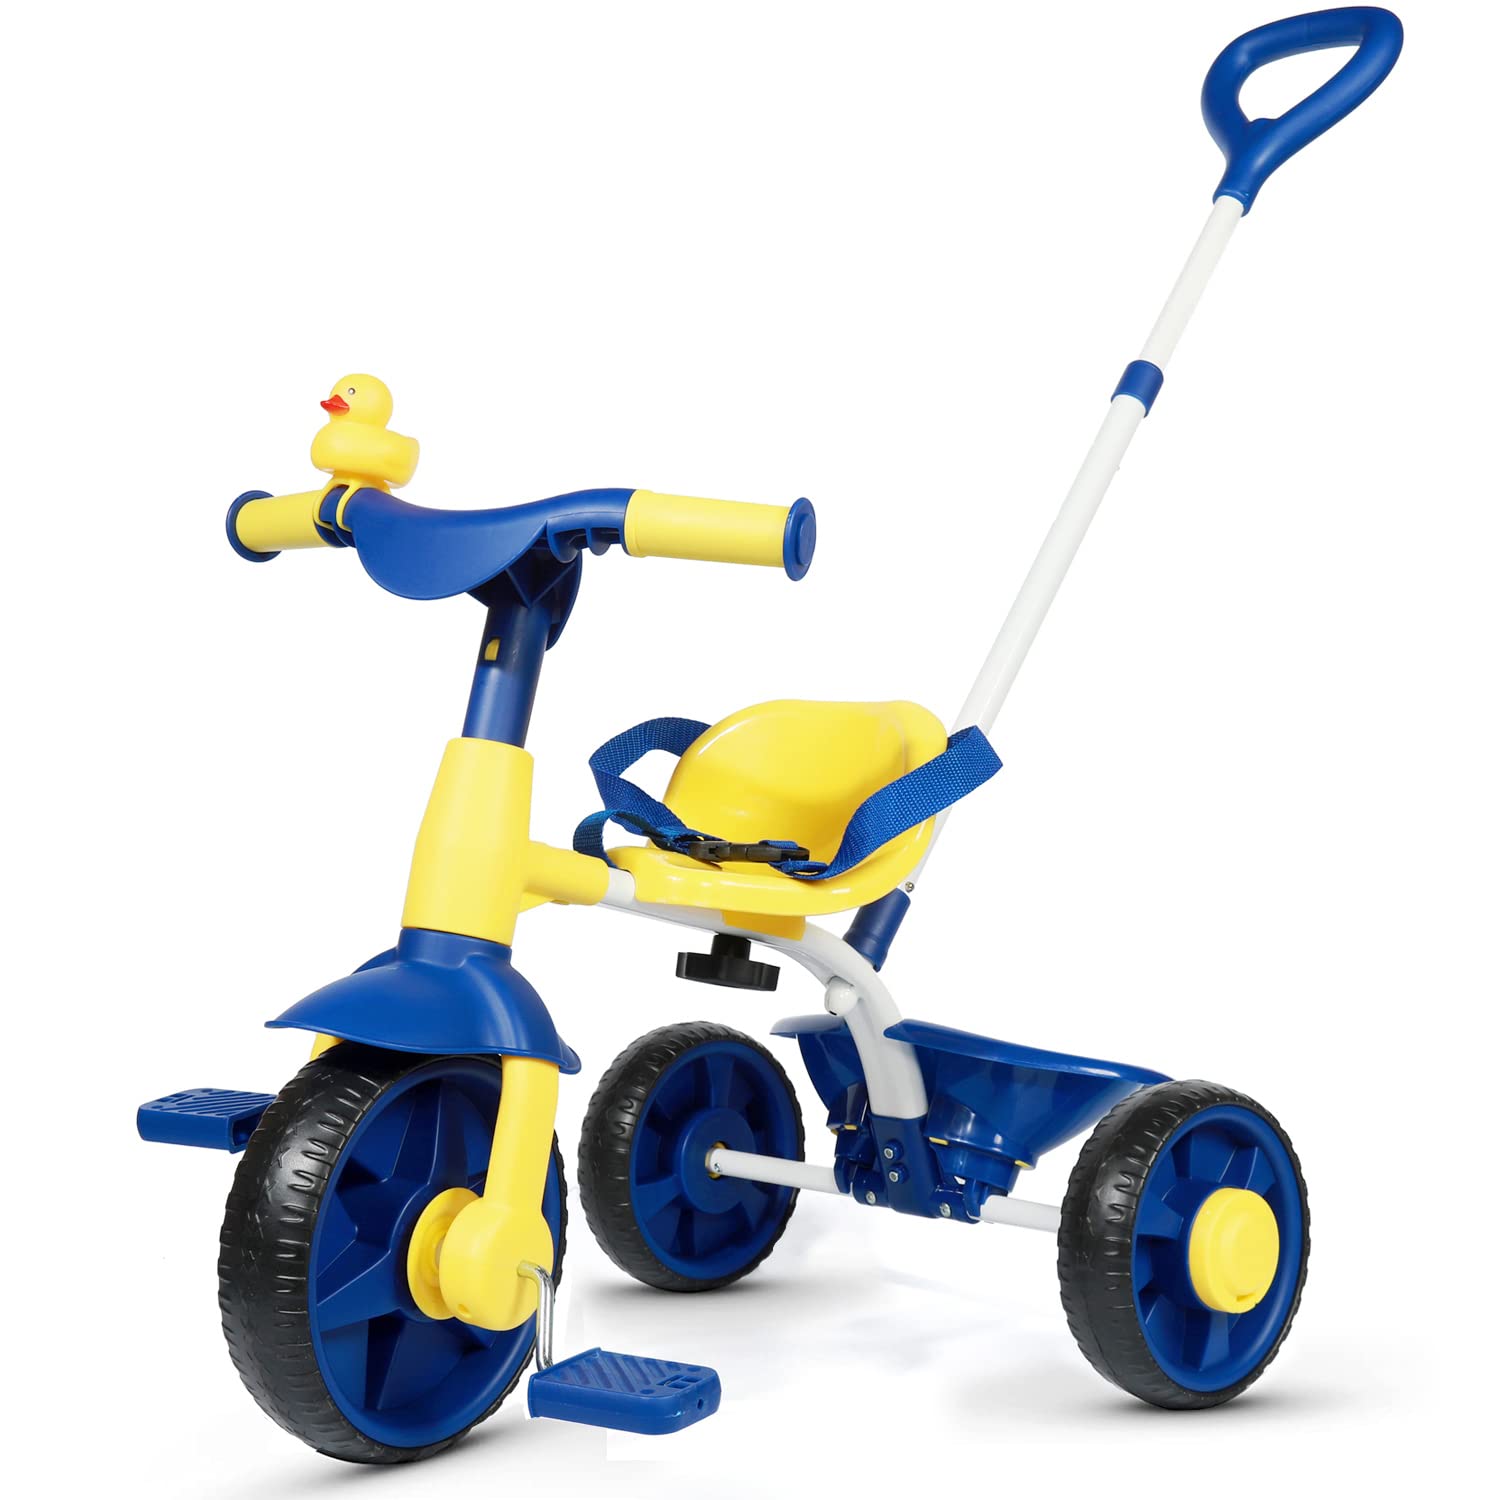 KRIDDO 2 in 1 Kids Tricycles Age 18 Month to 3 Years, EVA Wheels Upgraded Trikes Gift for Toddlers 2 to 3 Year Old with Push Handle and Duck Bell, Blue